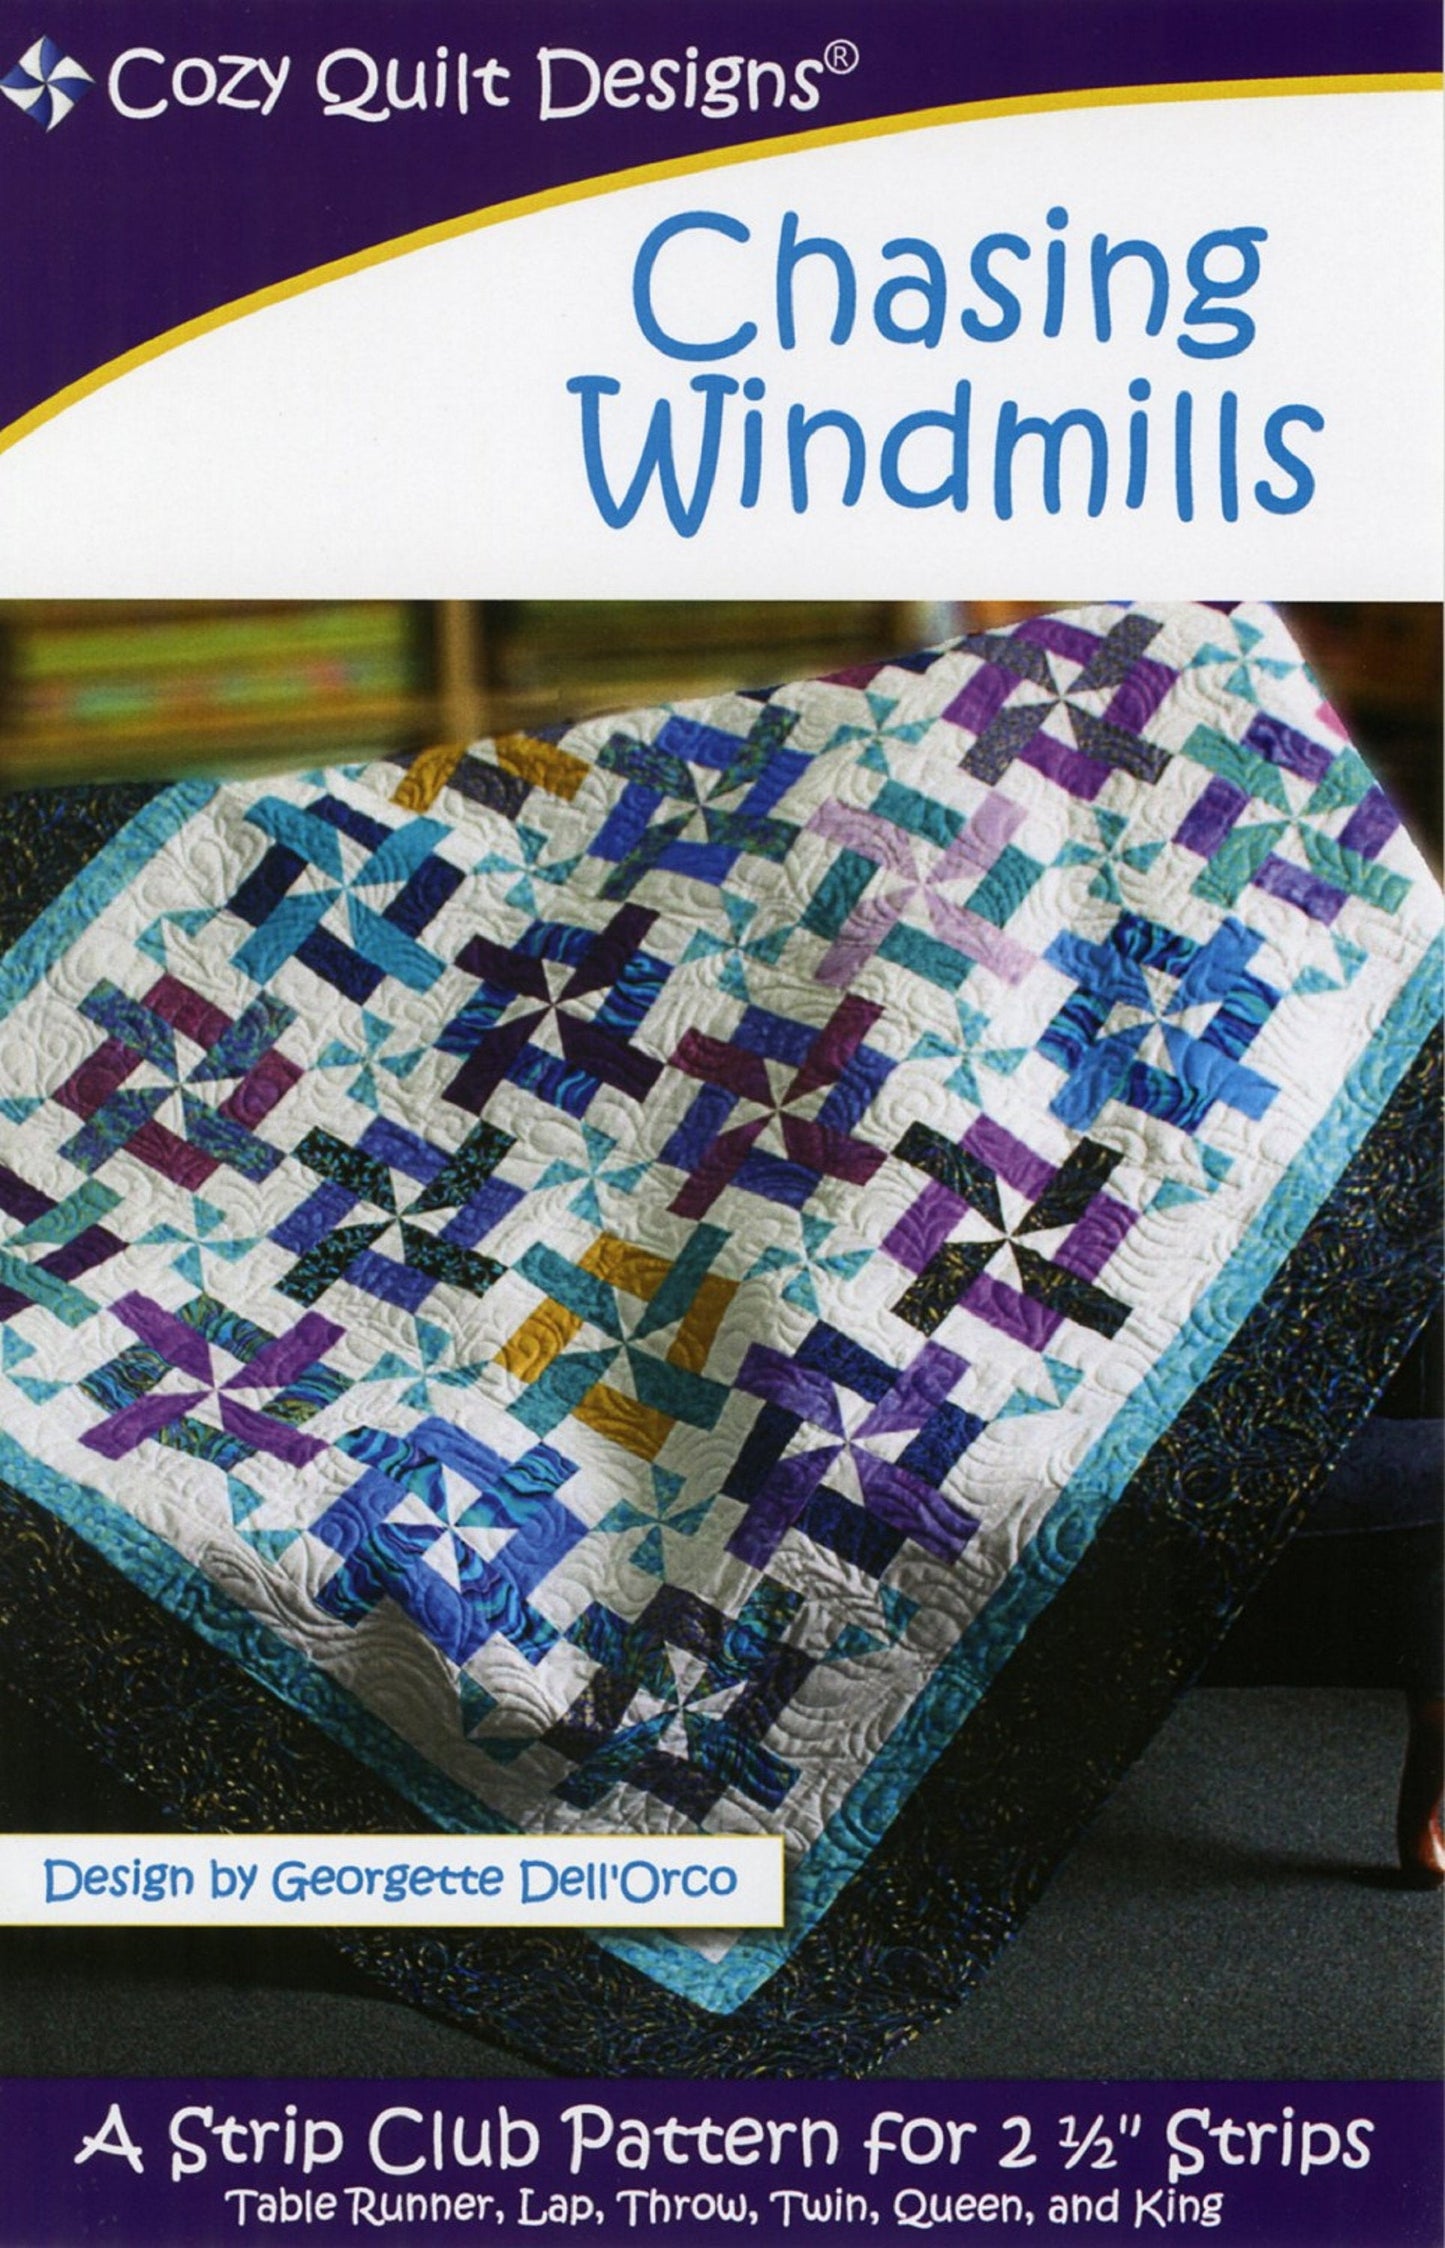 Chasing Windmills Quilt Pattern by Cozy Quilt Designs